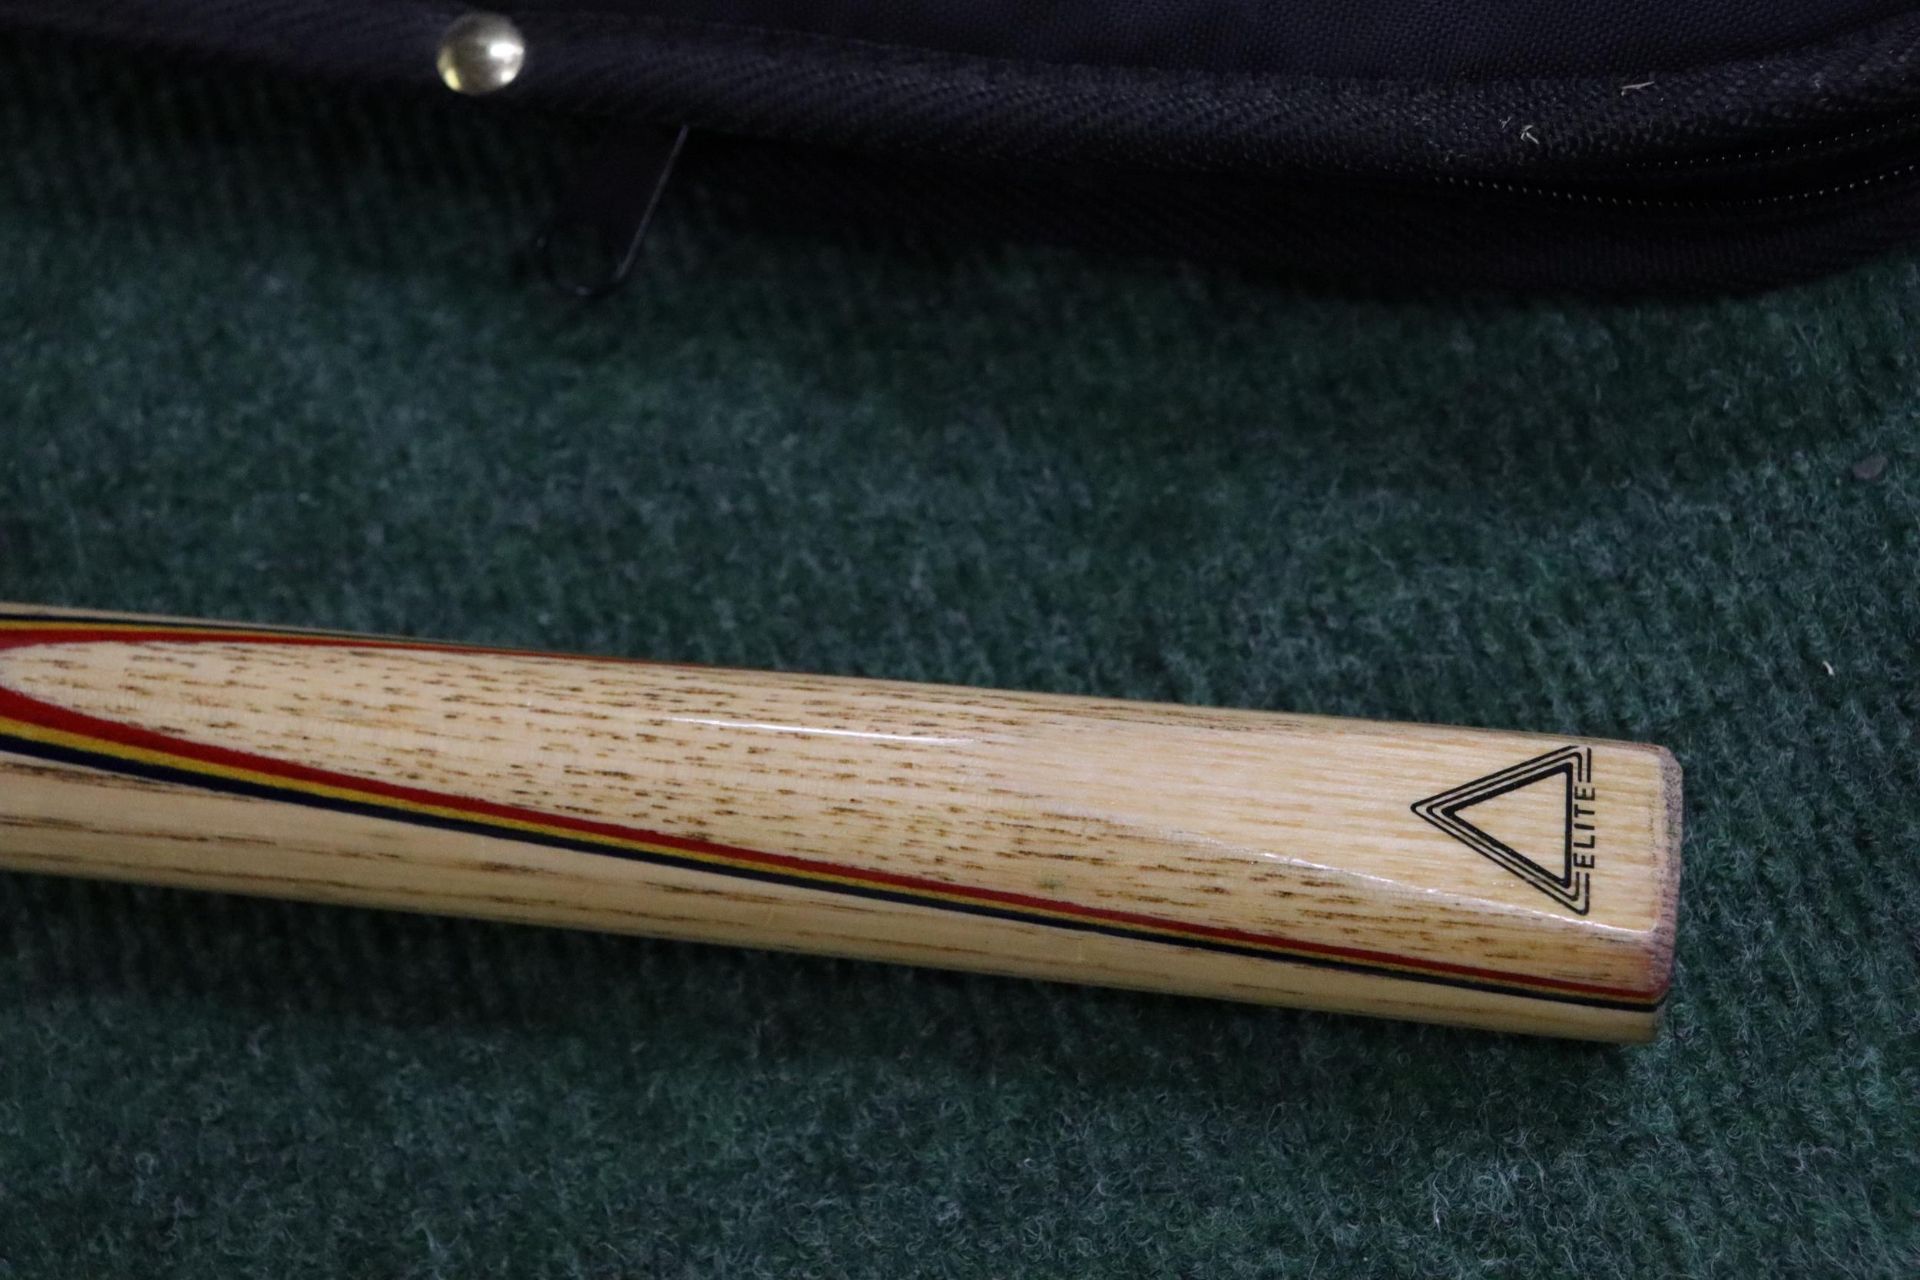 A SNOOKER/POOL CUE IN A JIMMY WHITE SOFT CASE - Image 2 of 8